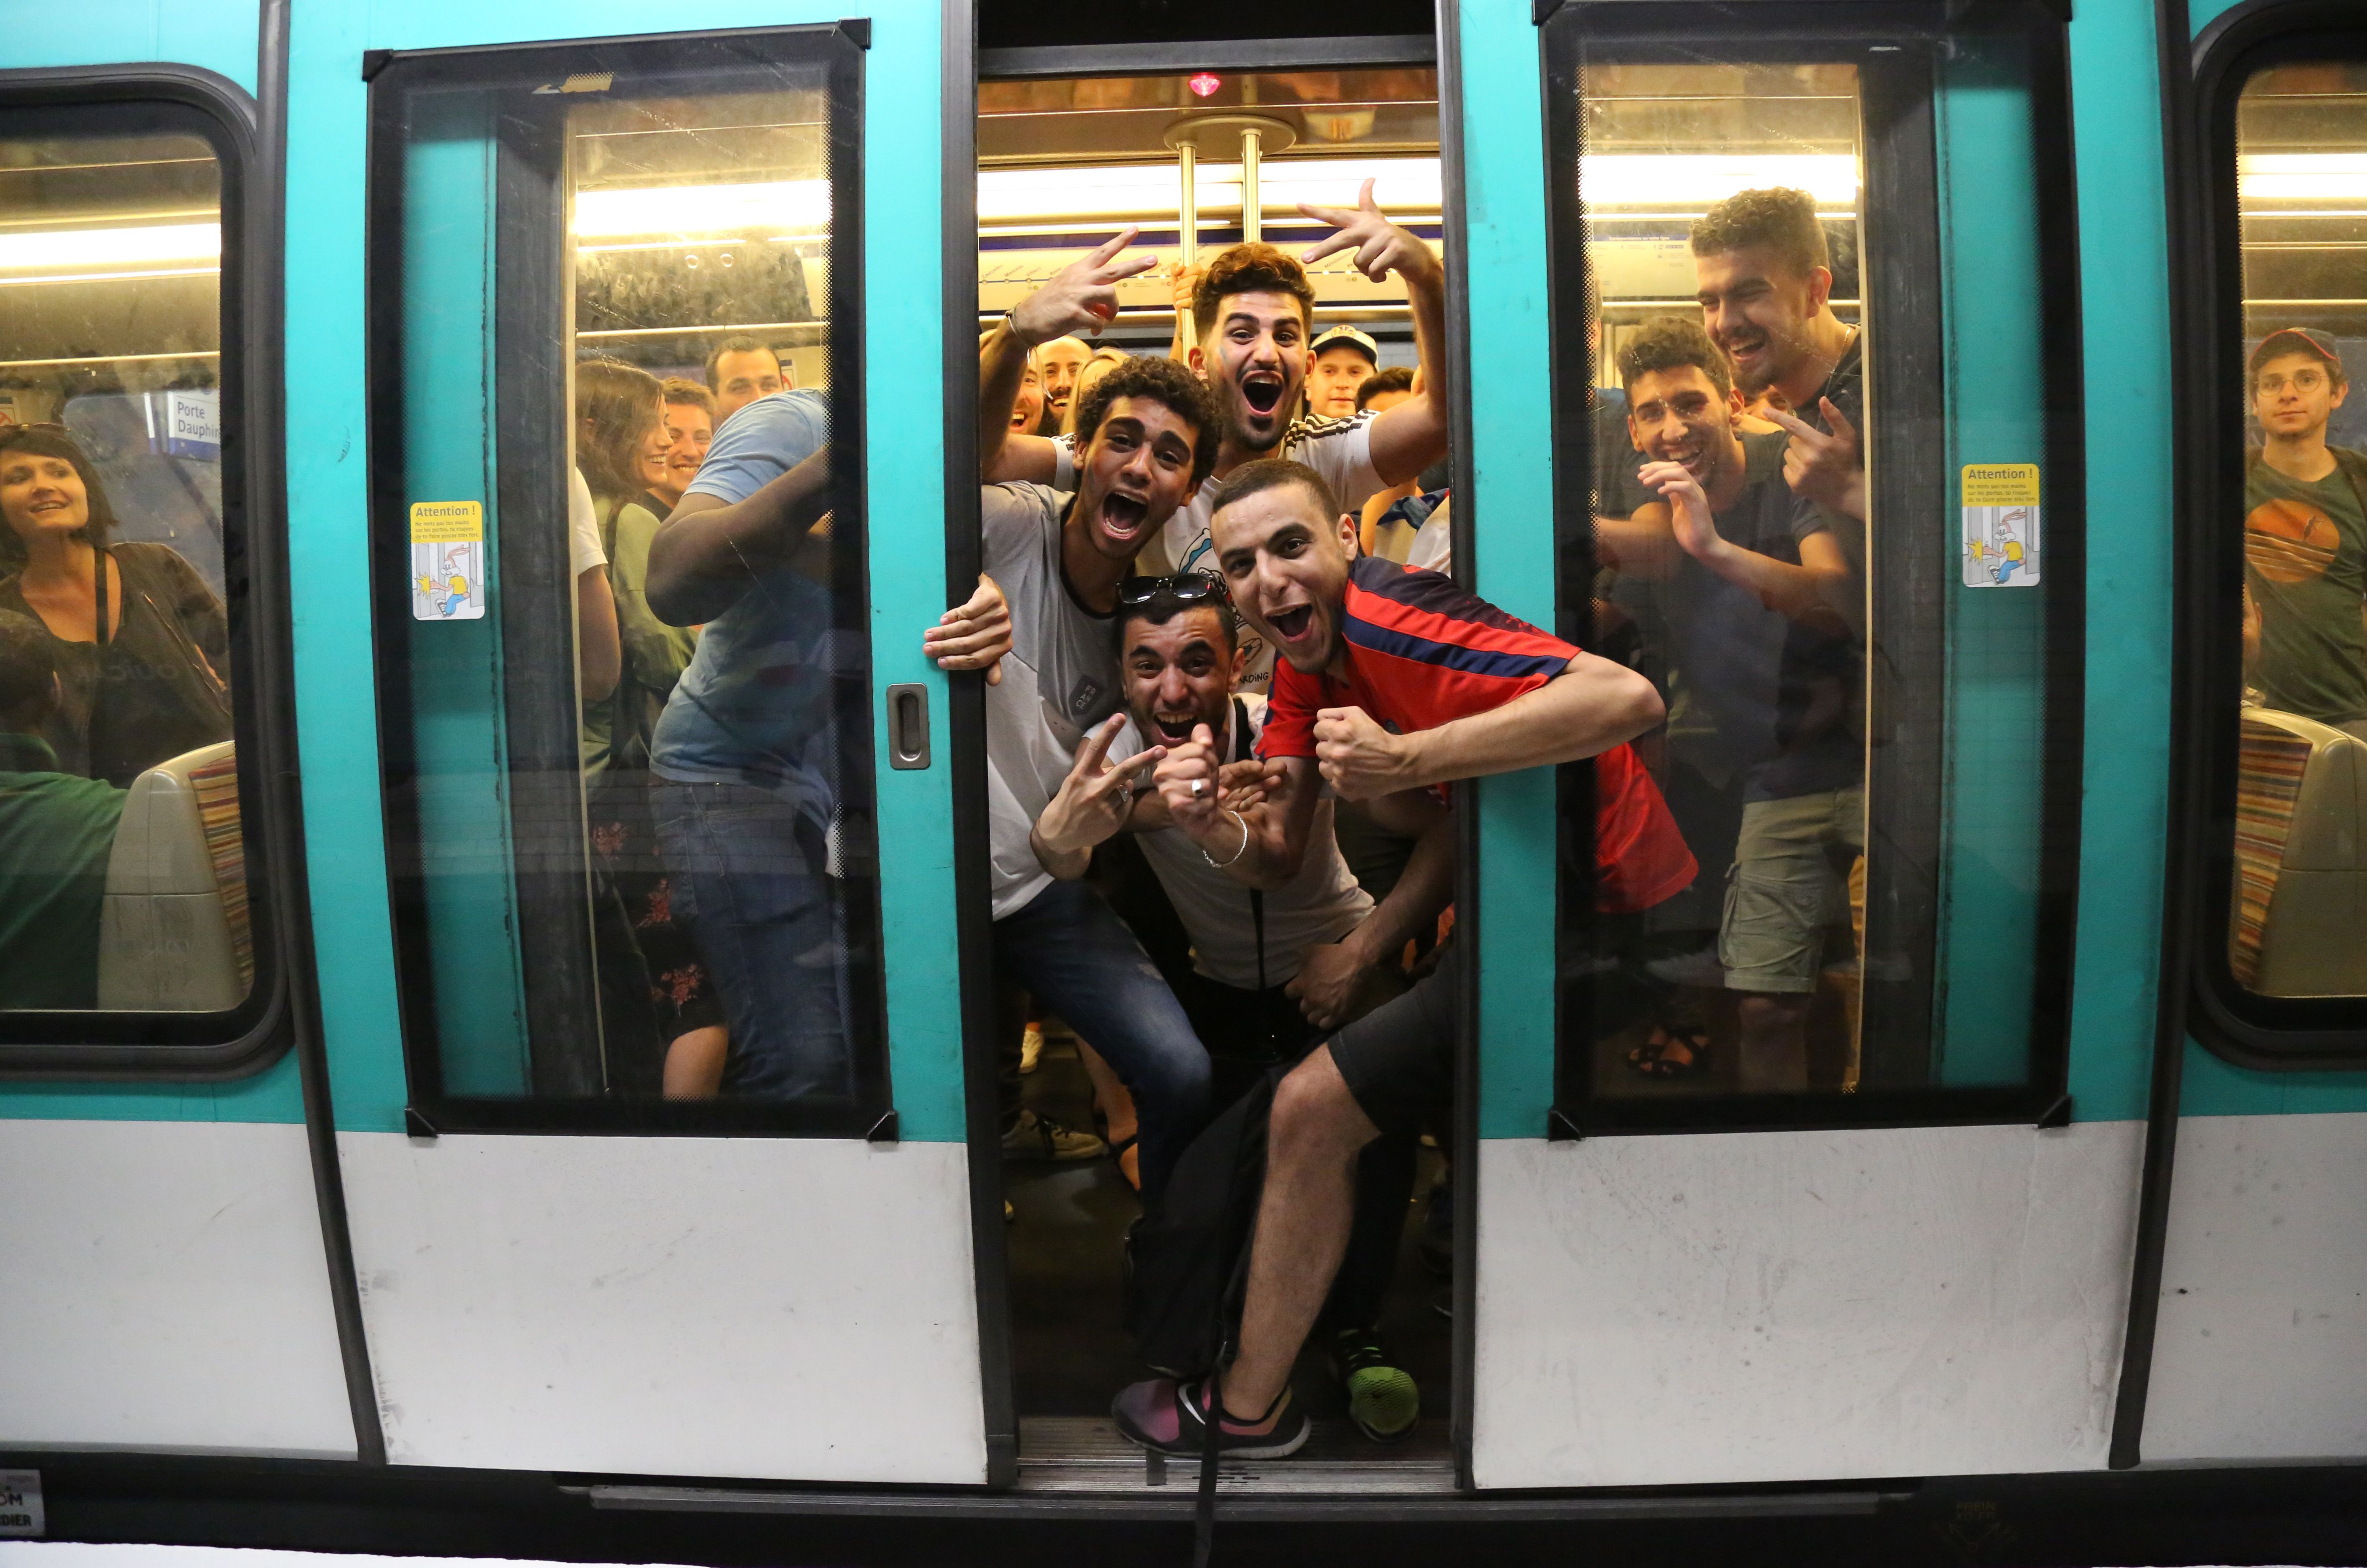 TOPSHOT - People celebrate France's 1-0 victory on board the Metro in Paris on July 10, 2018, after the final whistle of the Russia 2018 World Cup semi-final football match between France and Belgium. (Photo by Zakaria ABDELKAFI / AFP) (Photo credit should read ZAKARIA ABDELKAFI/AFP/Getty Images)